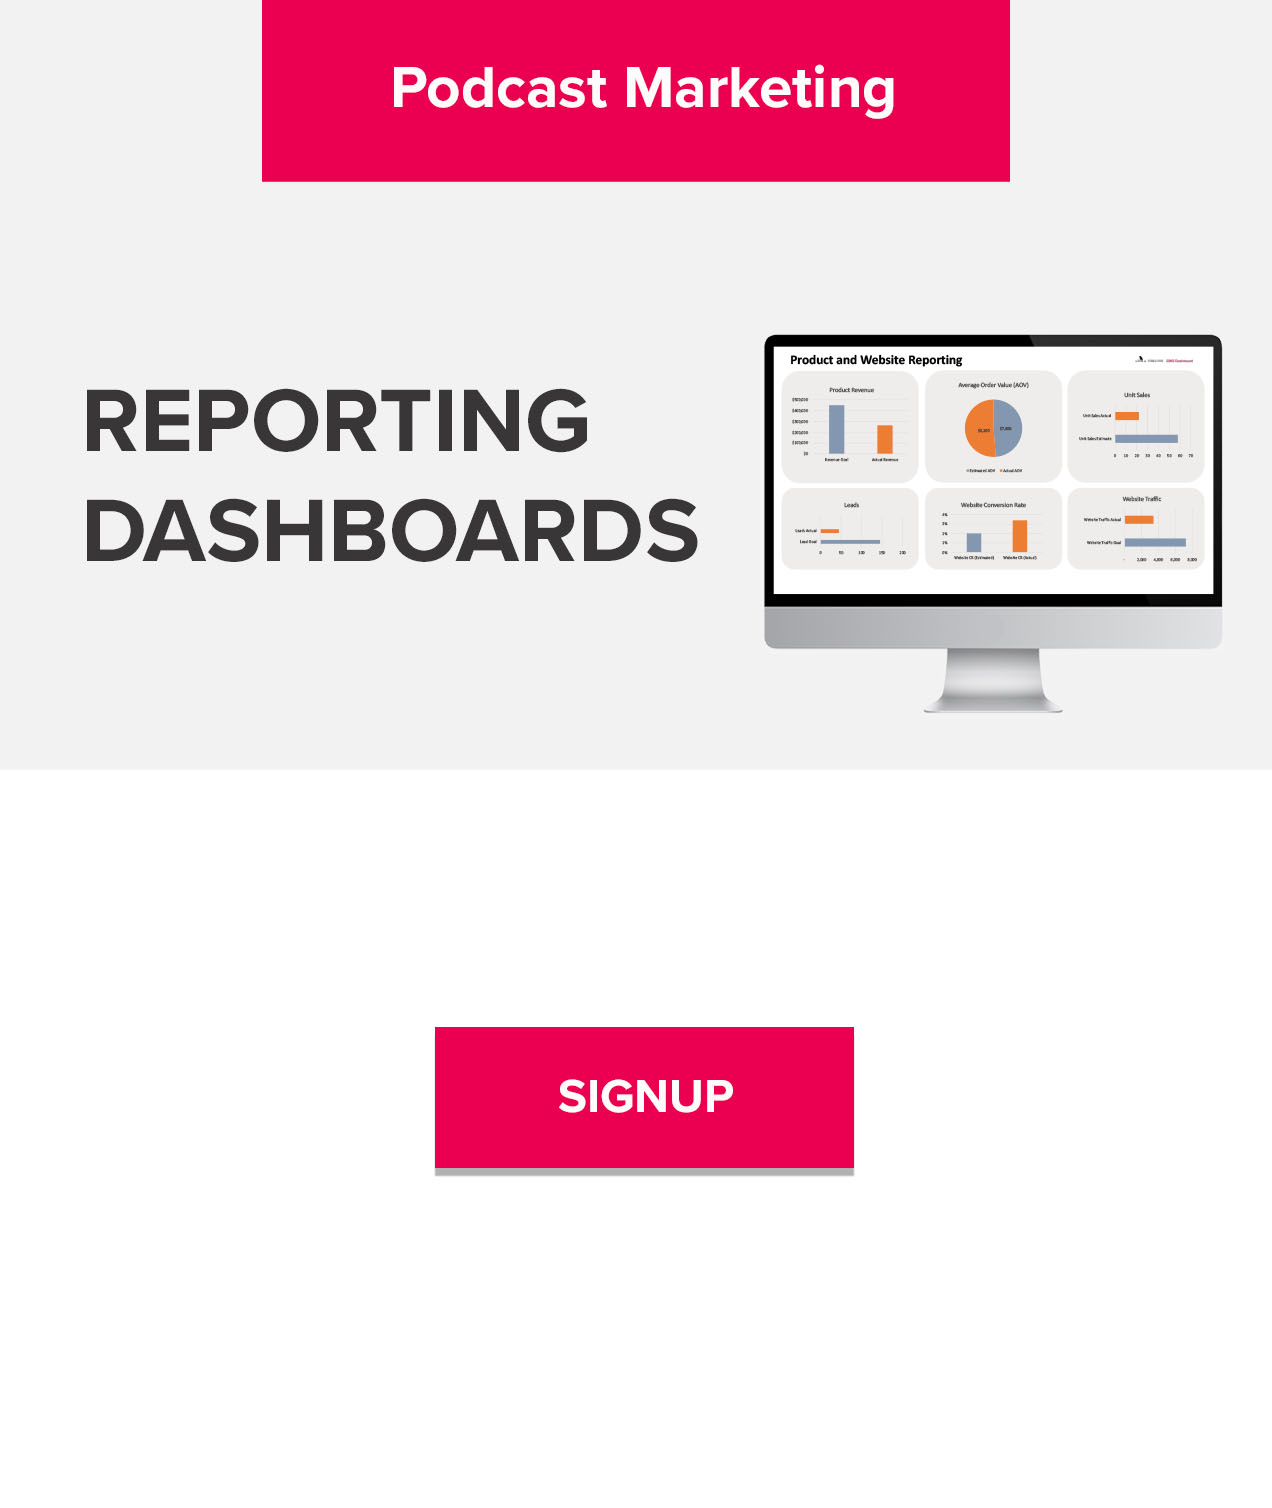 CMO Dashboard Podcast Marketing Reporting